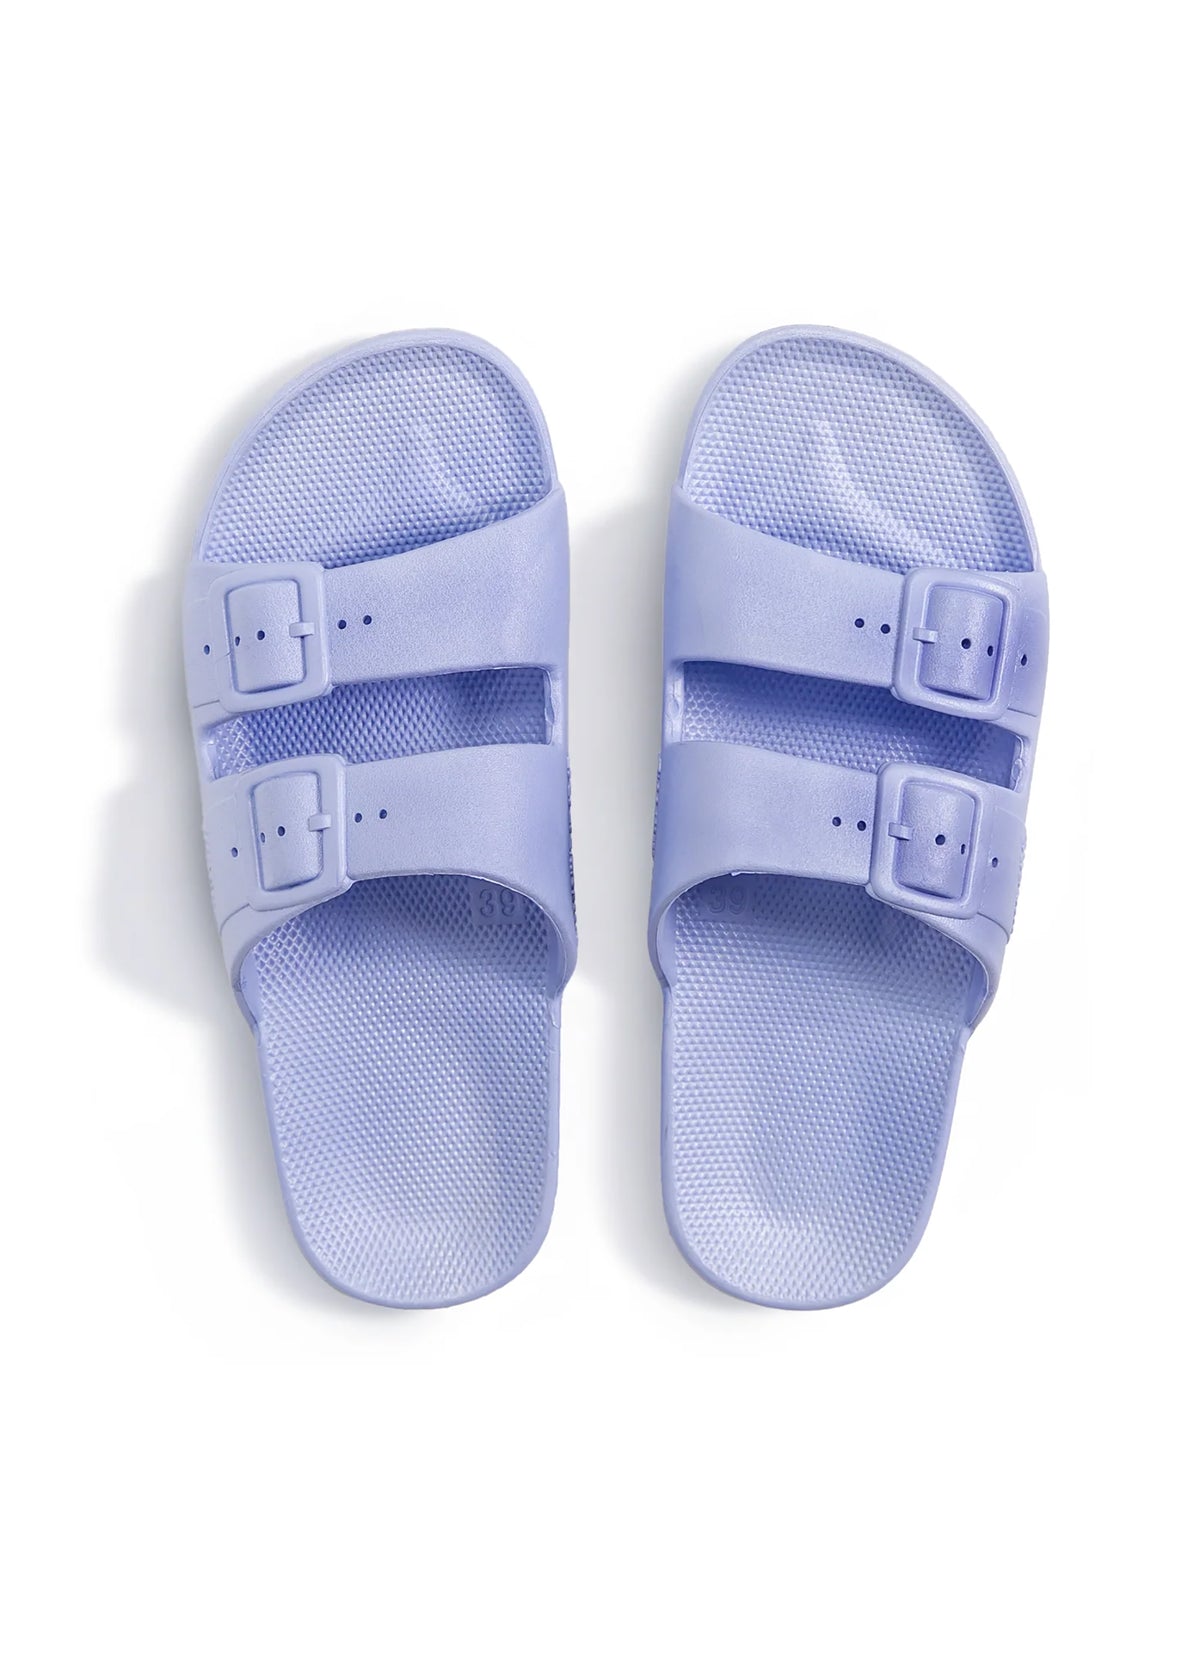 Freedom Moses sandals - wedges with two straps, Hydra, blue